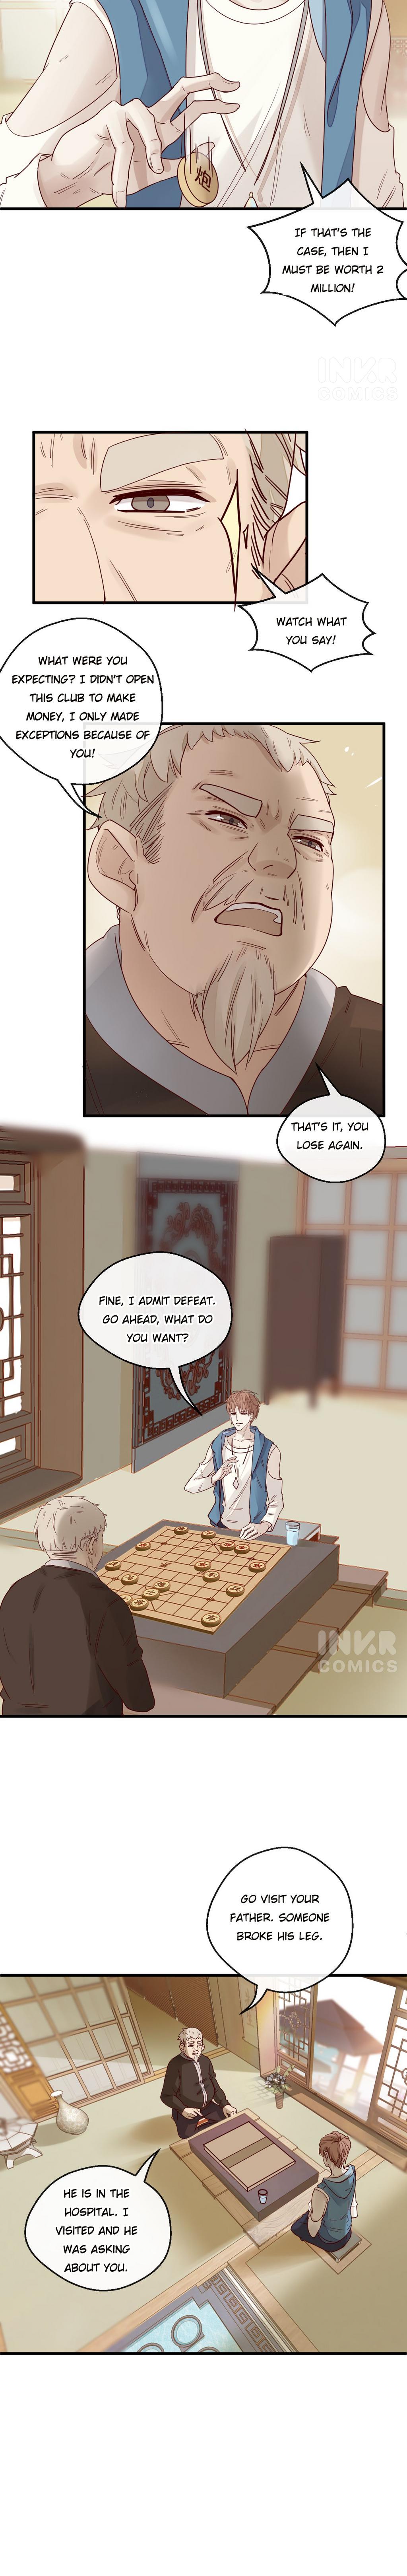 Accidental Love - Page 3